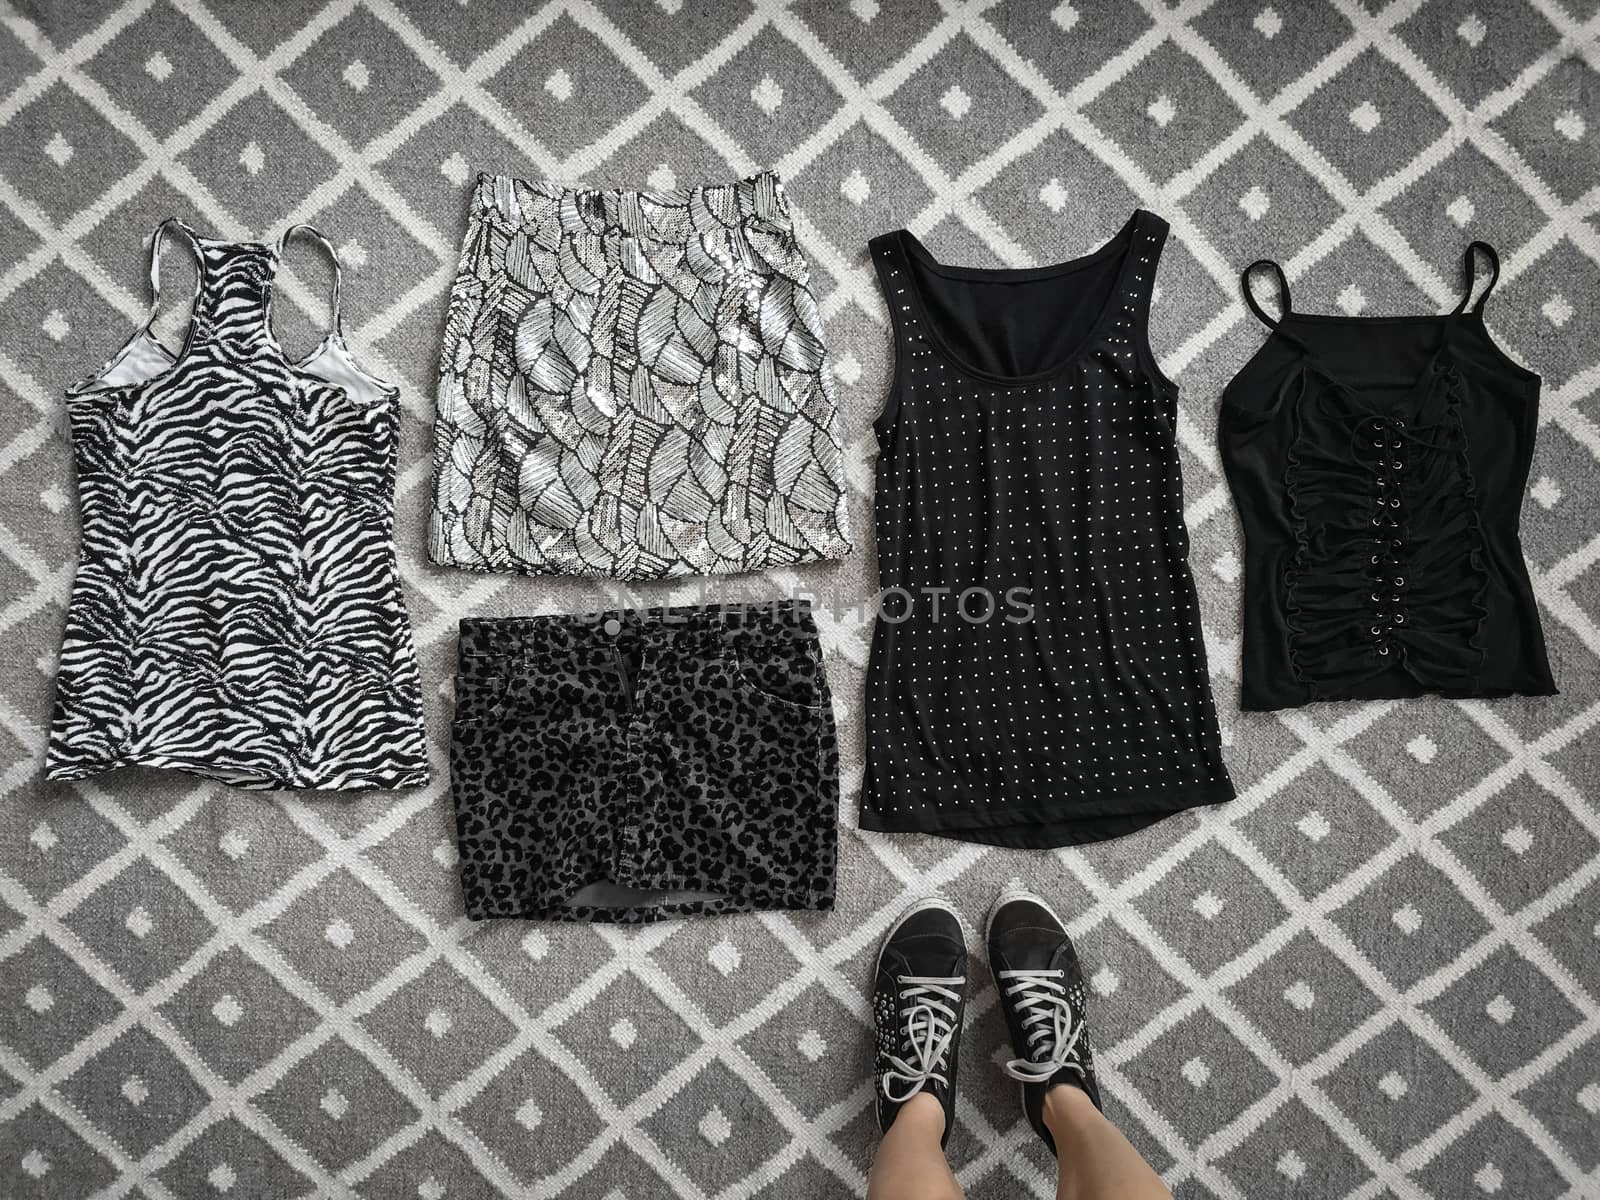 Choice of stylish clothes on the floor by anikasalsera